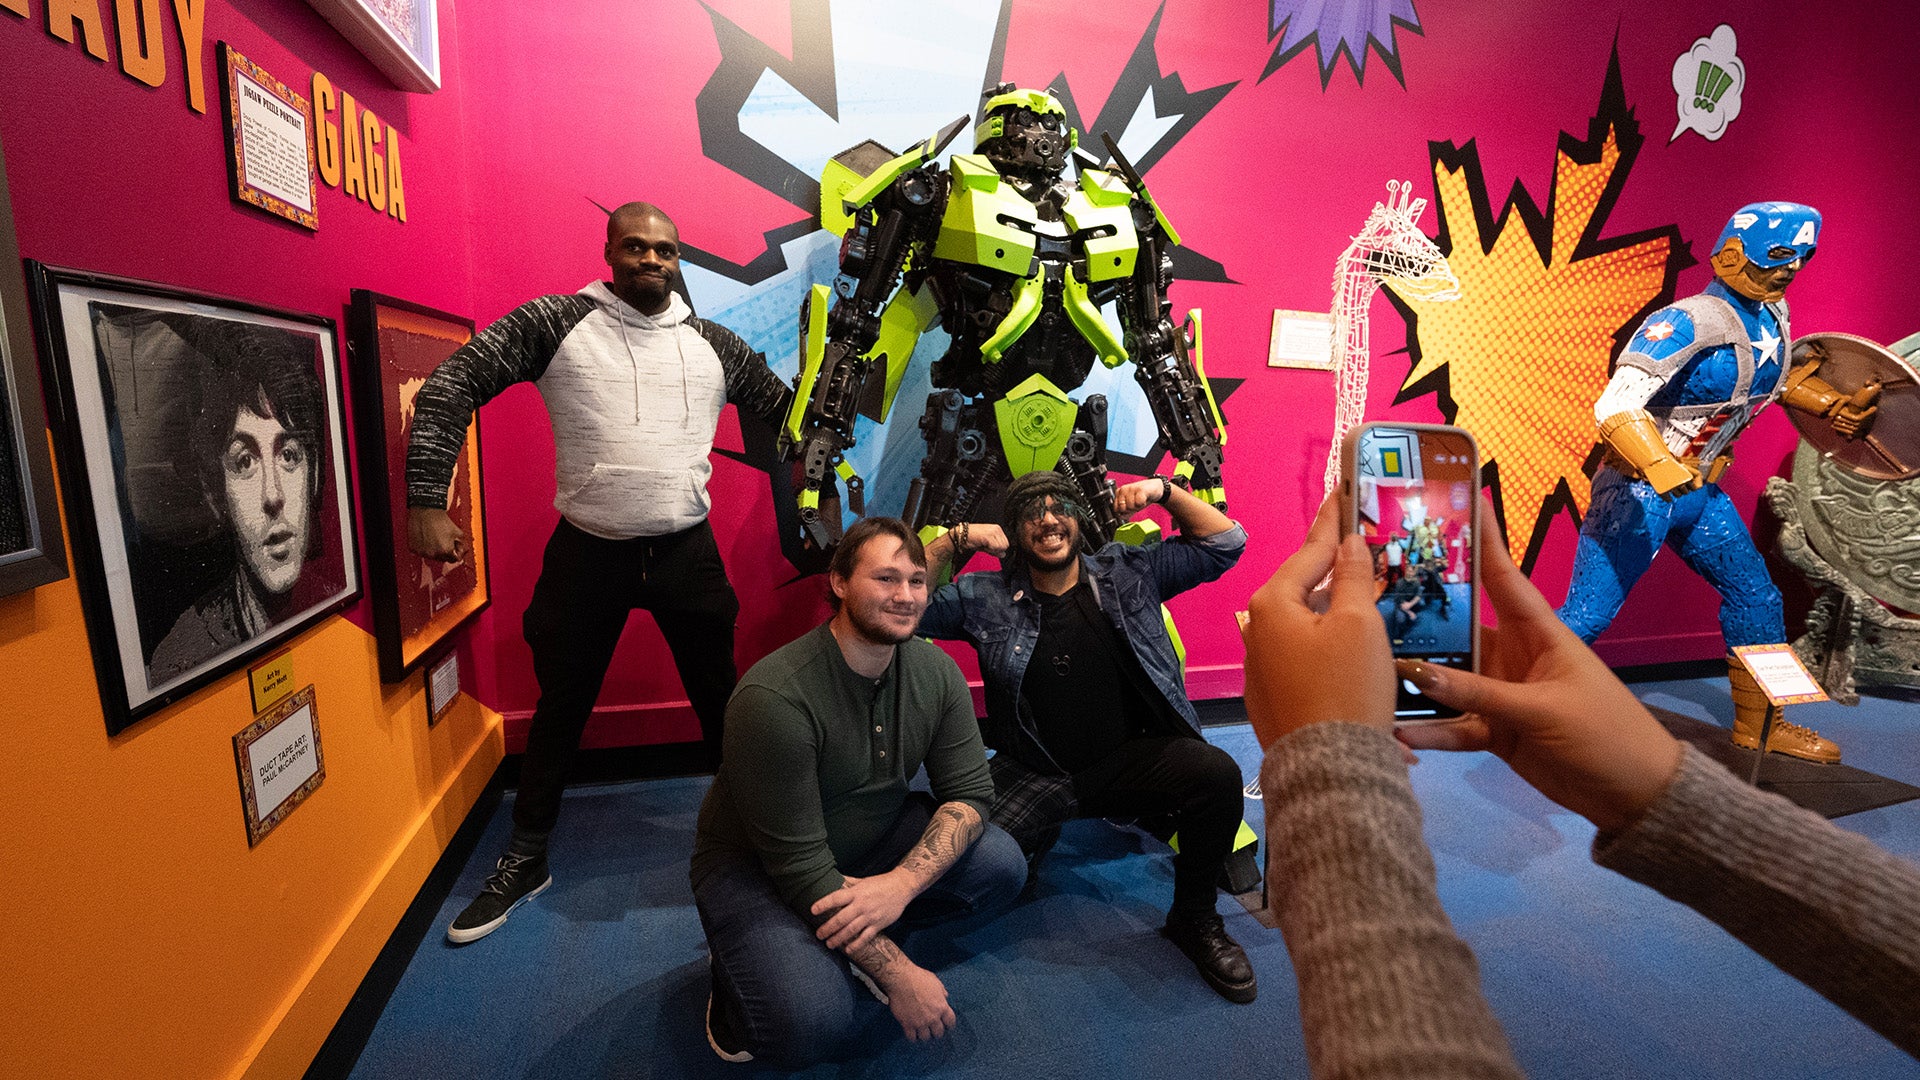 Three men posing next to a character from Transformers in front of a comic art painted wall